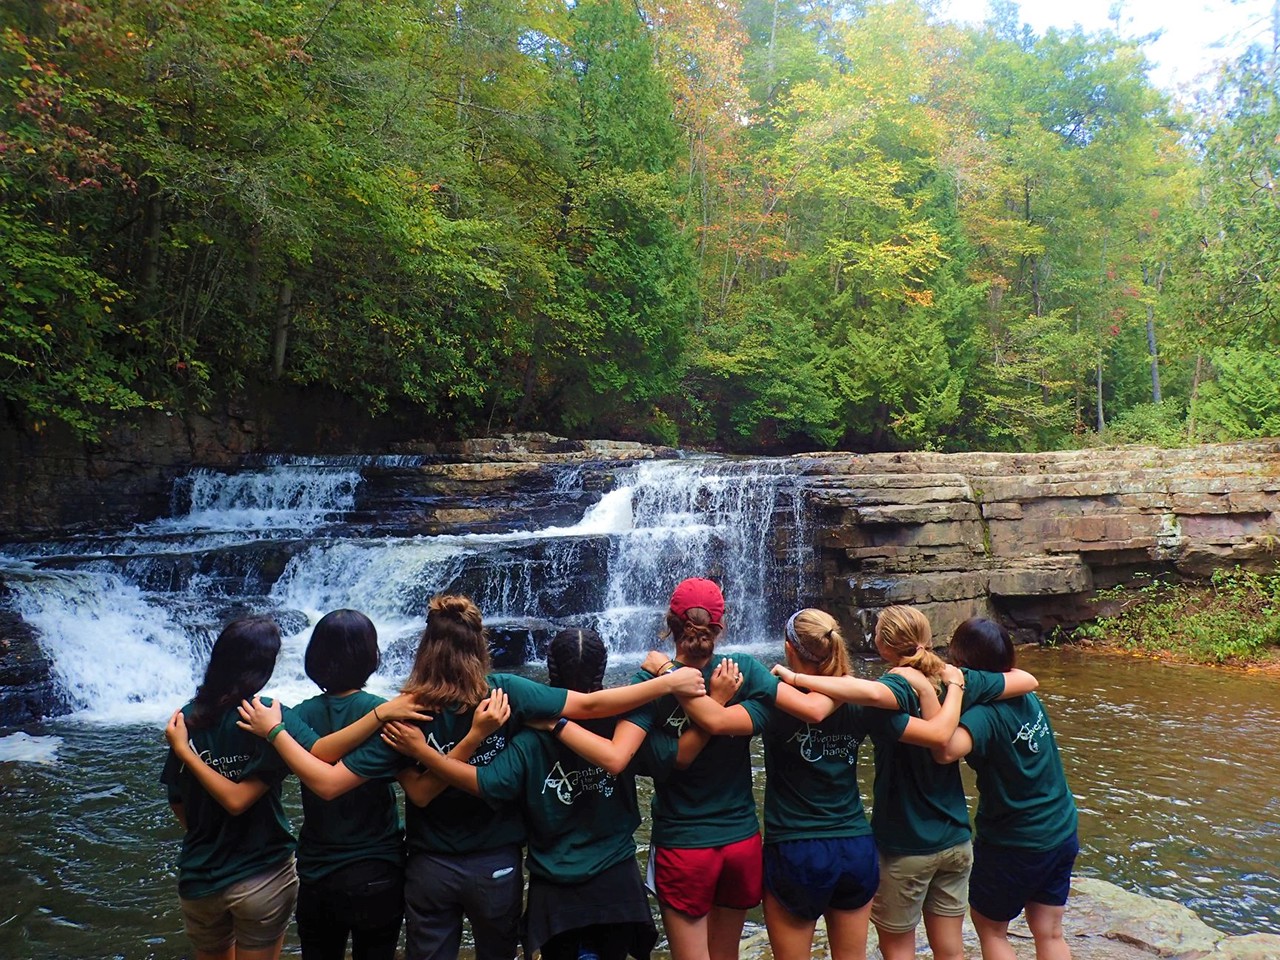 A group of 8 students stand together, arms linked, in front of a small waterfall.